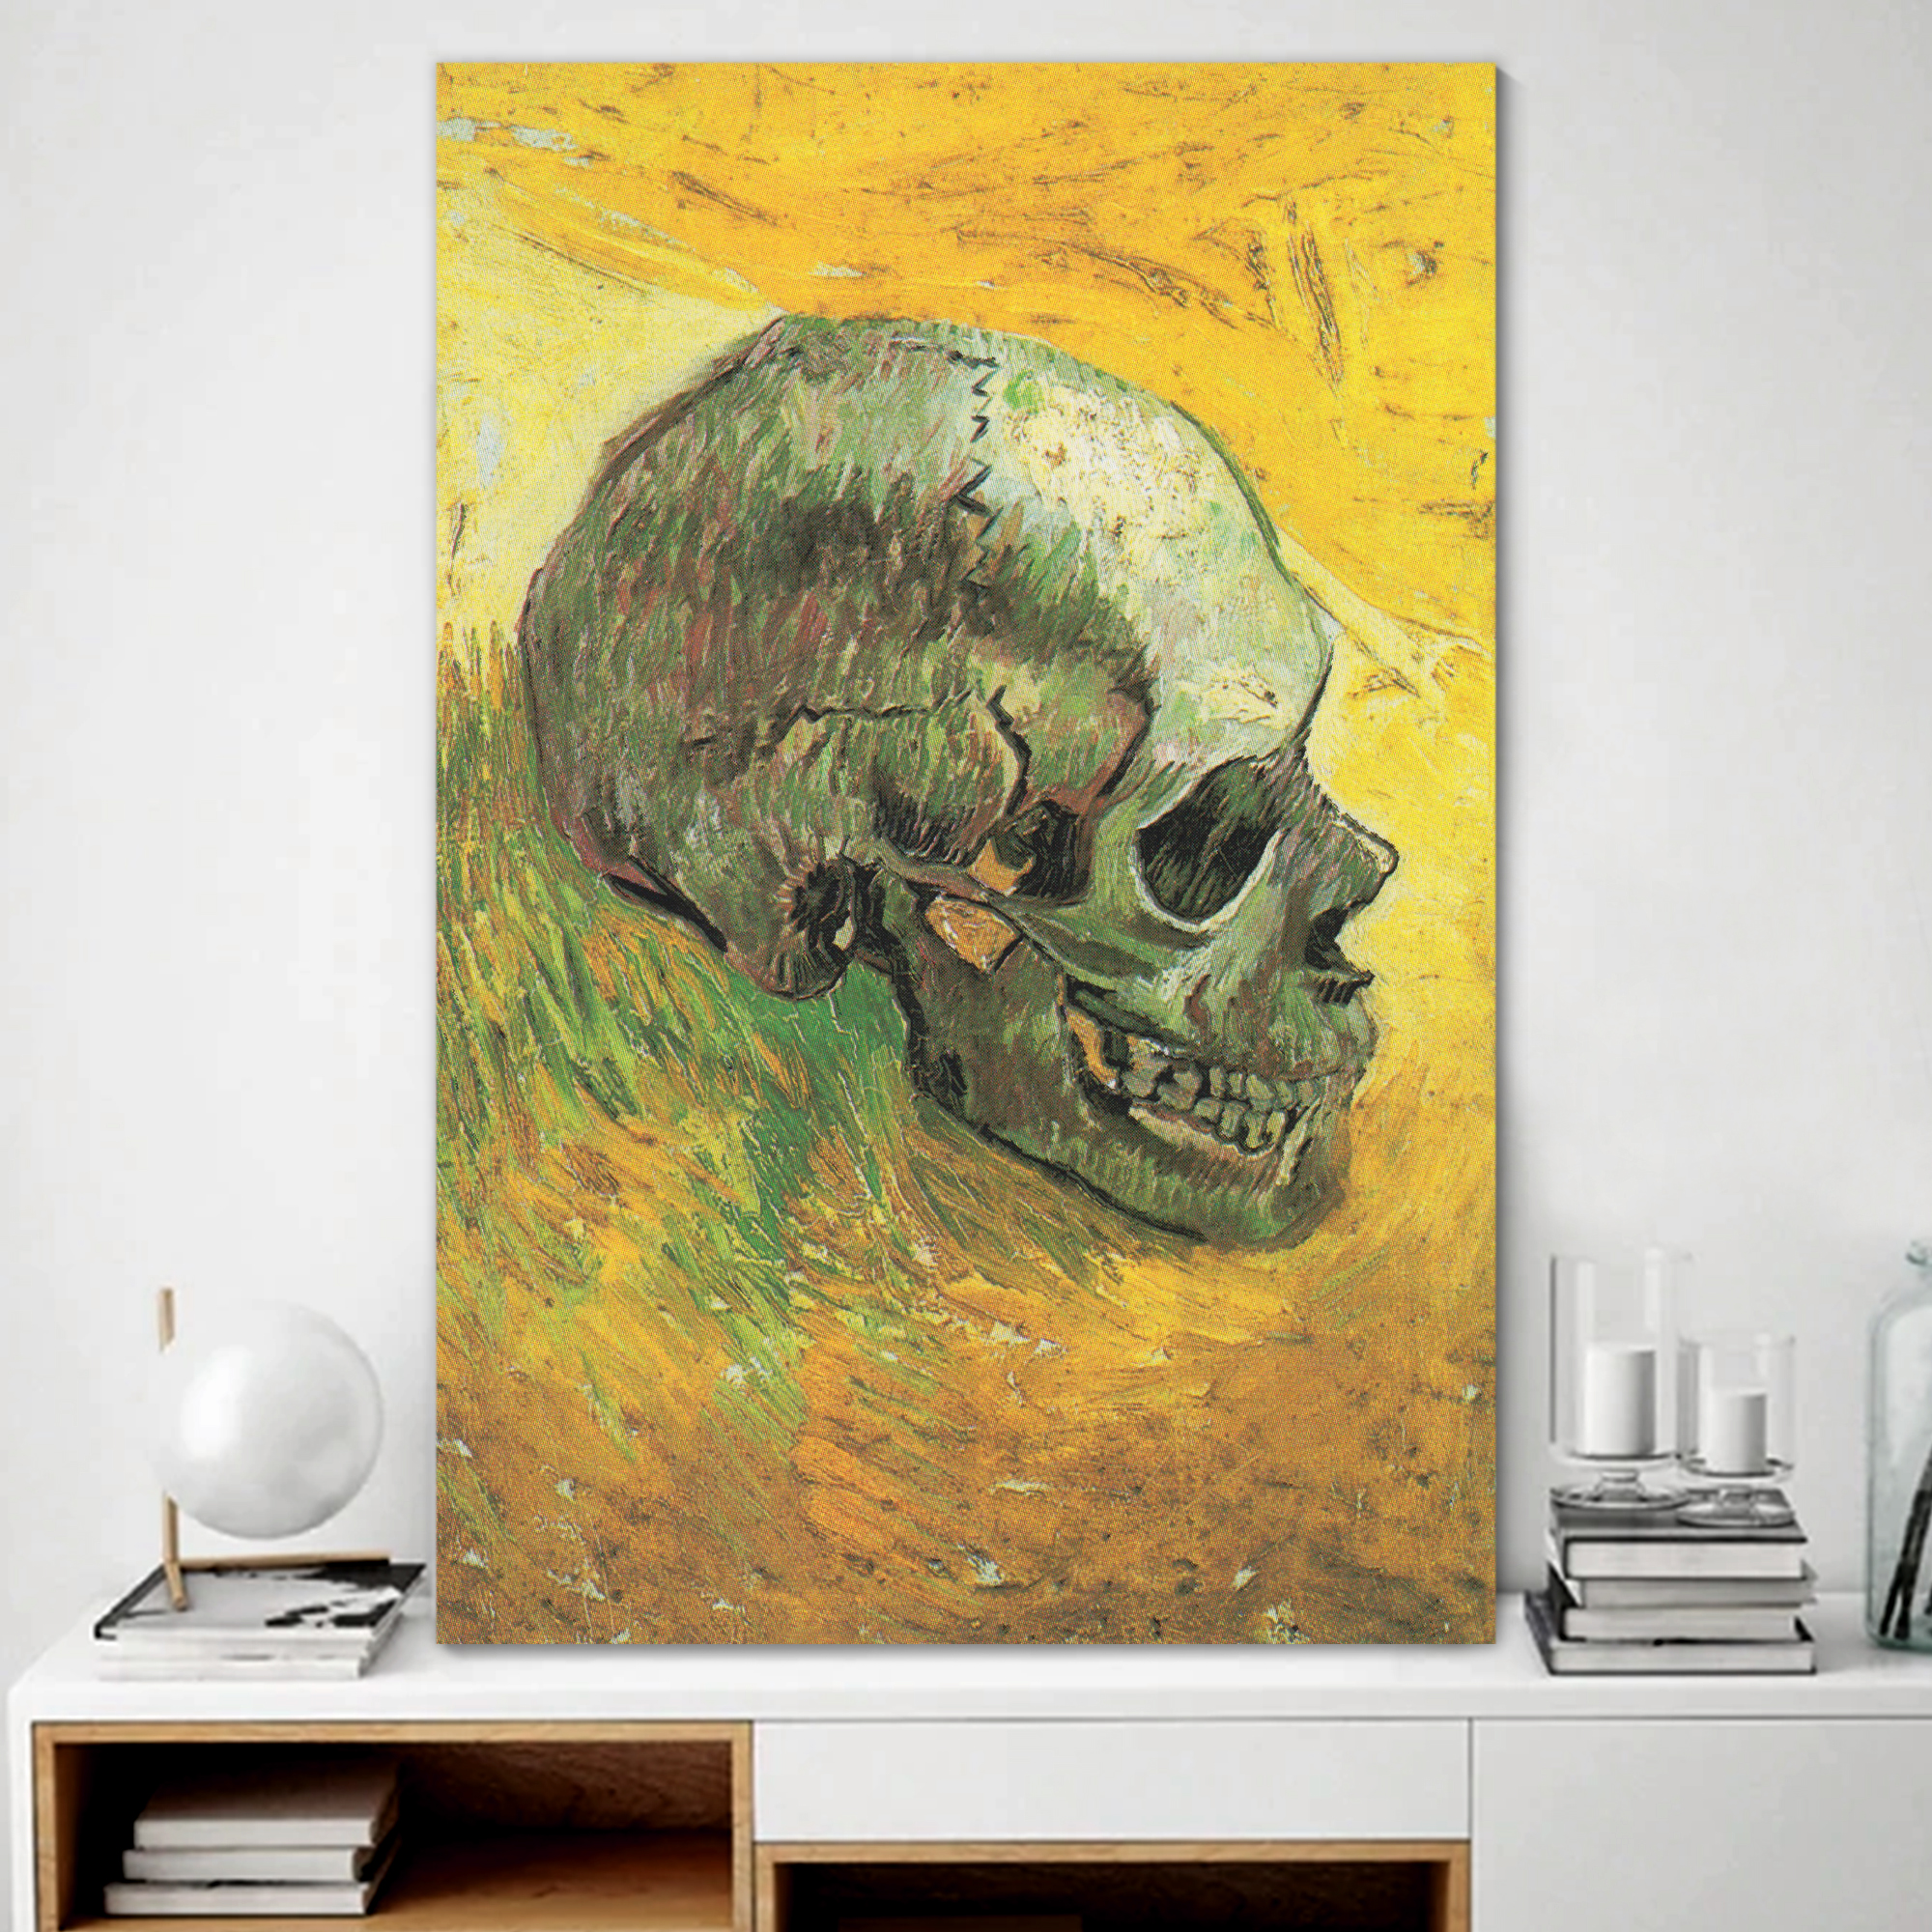 16 x 20 Skull by Vincent Van Gogh Oil Painting Reproduction on Canvas Prints